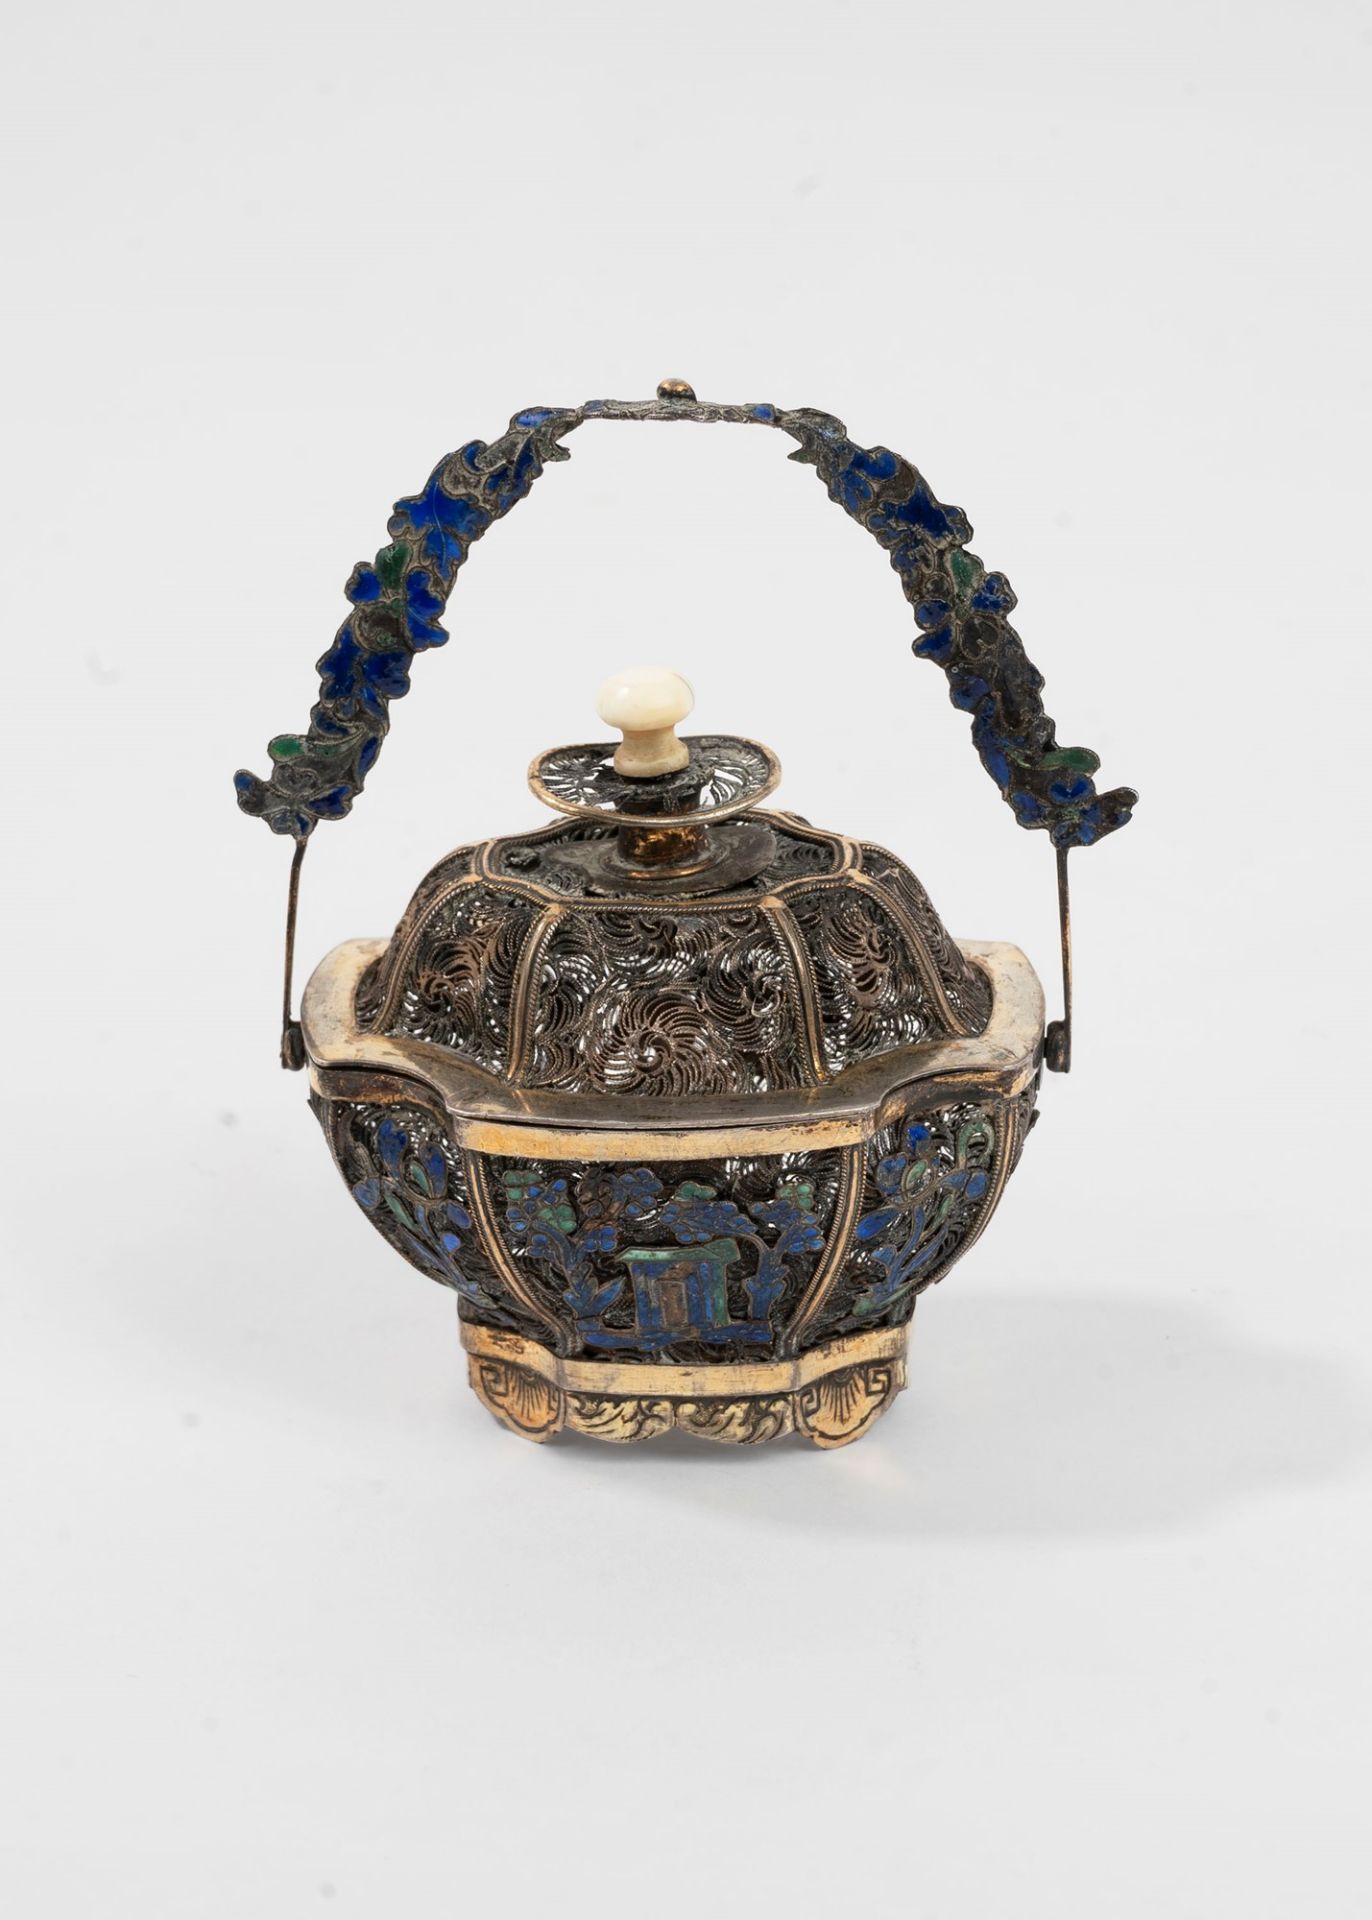 Basket in gilded silver filigree and enamel, China, late 19th century - early 20th century